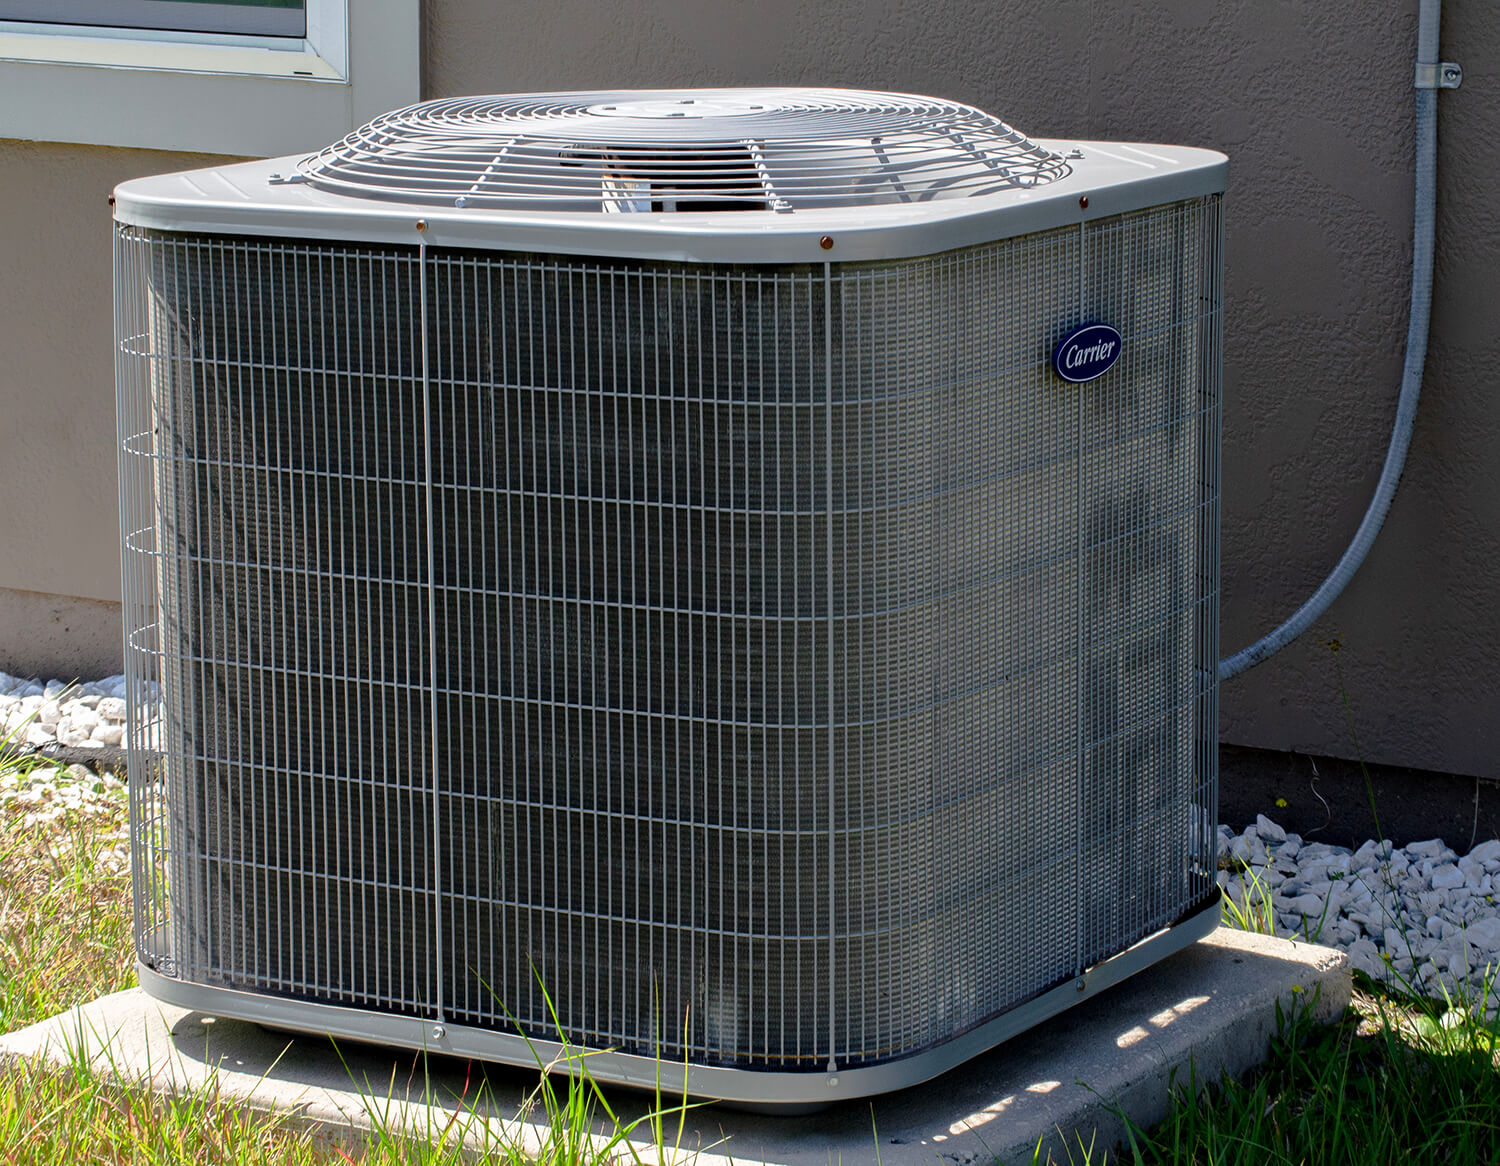 Heating and Cooling the Home With a Good HVAC System is Critical